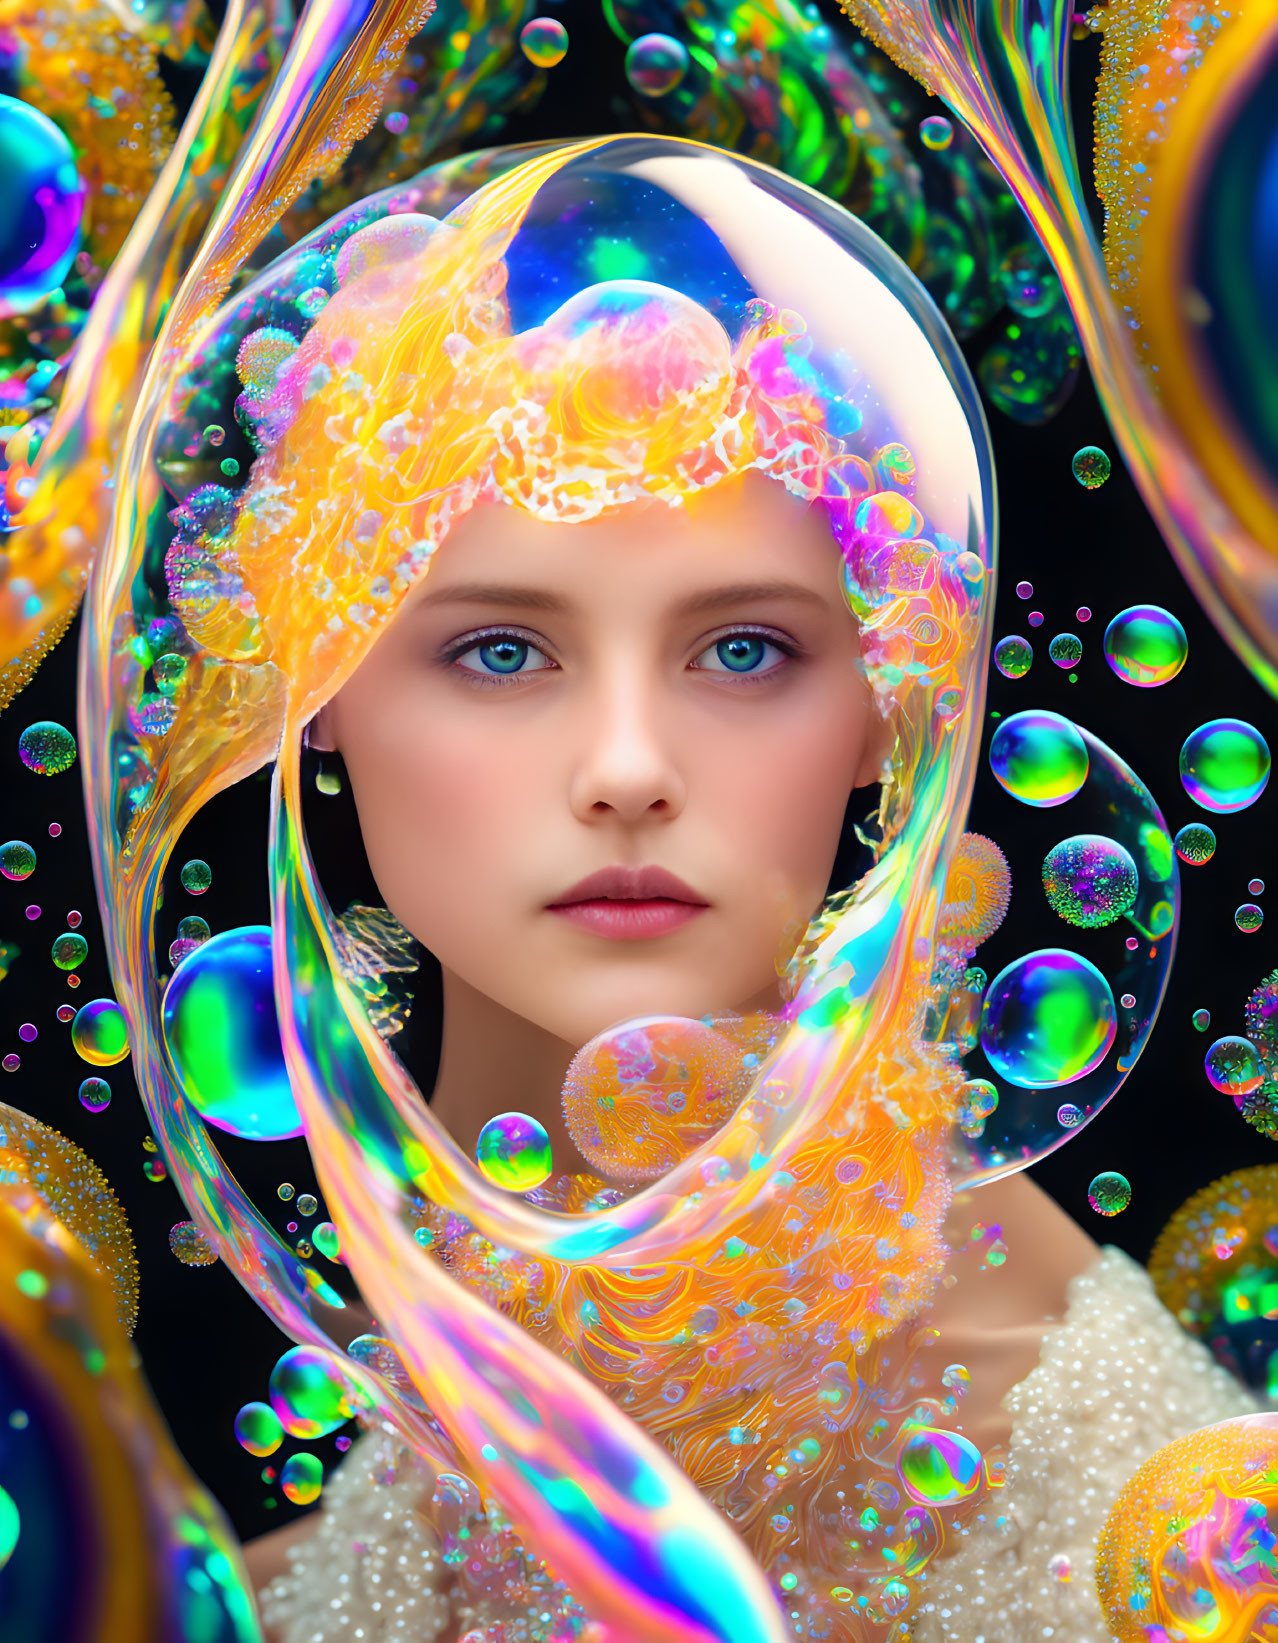 Vibrant surreal portrait with blue eyes and colorful bubbles on black background